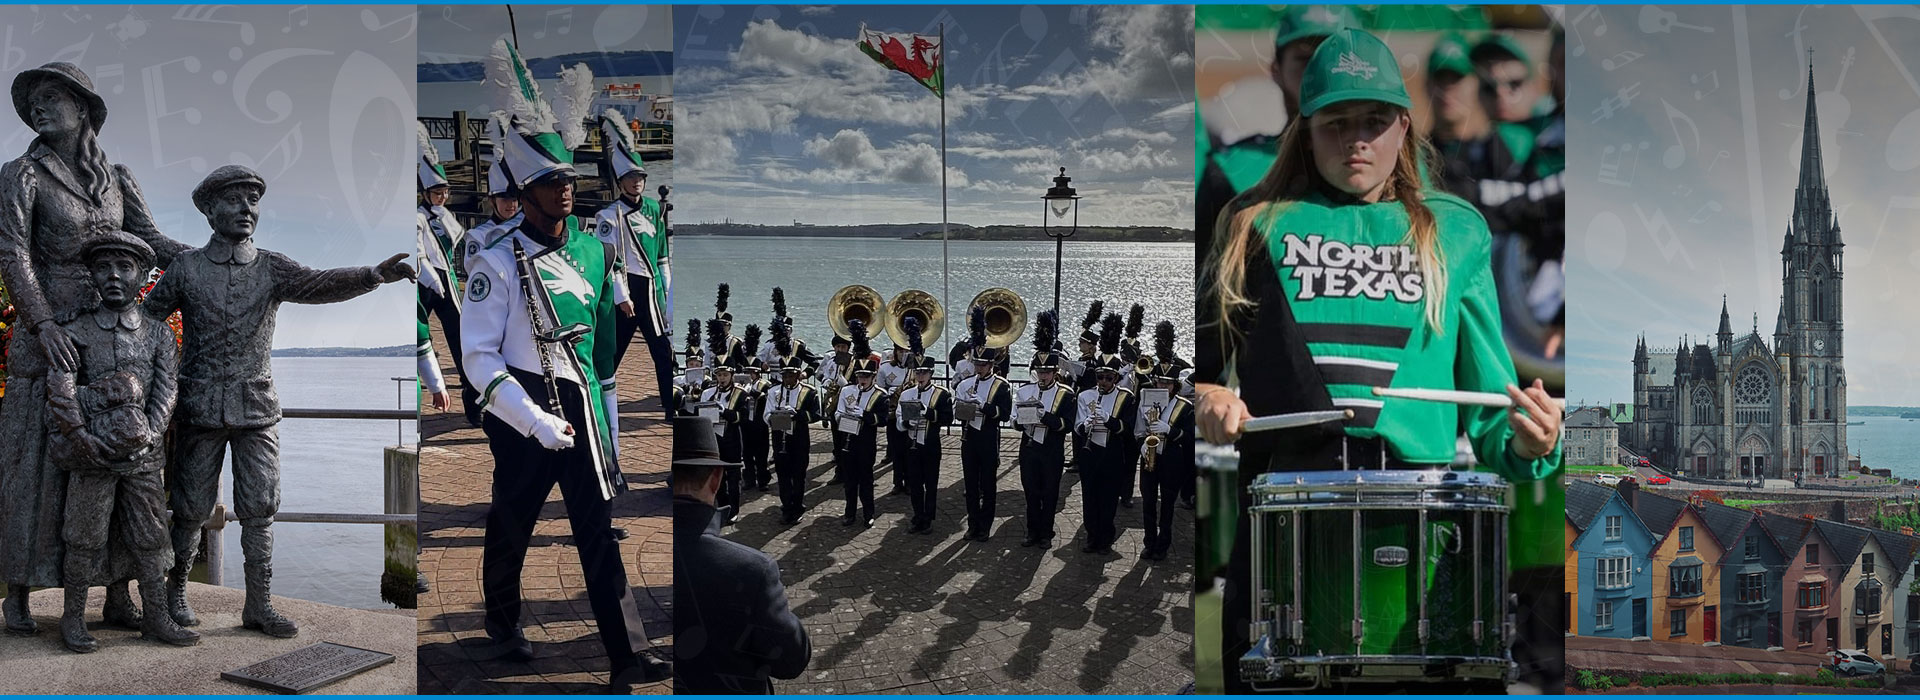 Cobh St. Partick's Day Parade Marching performance trips